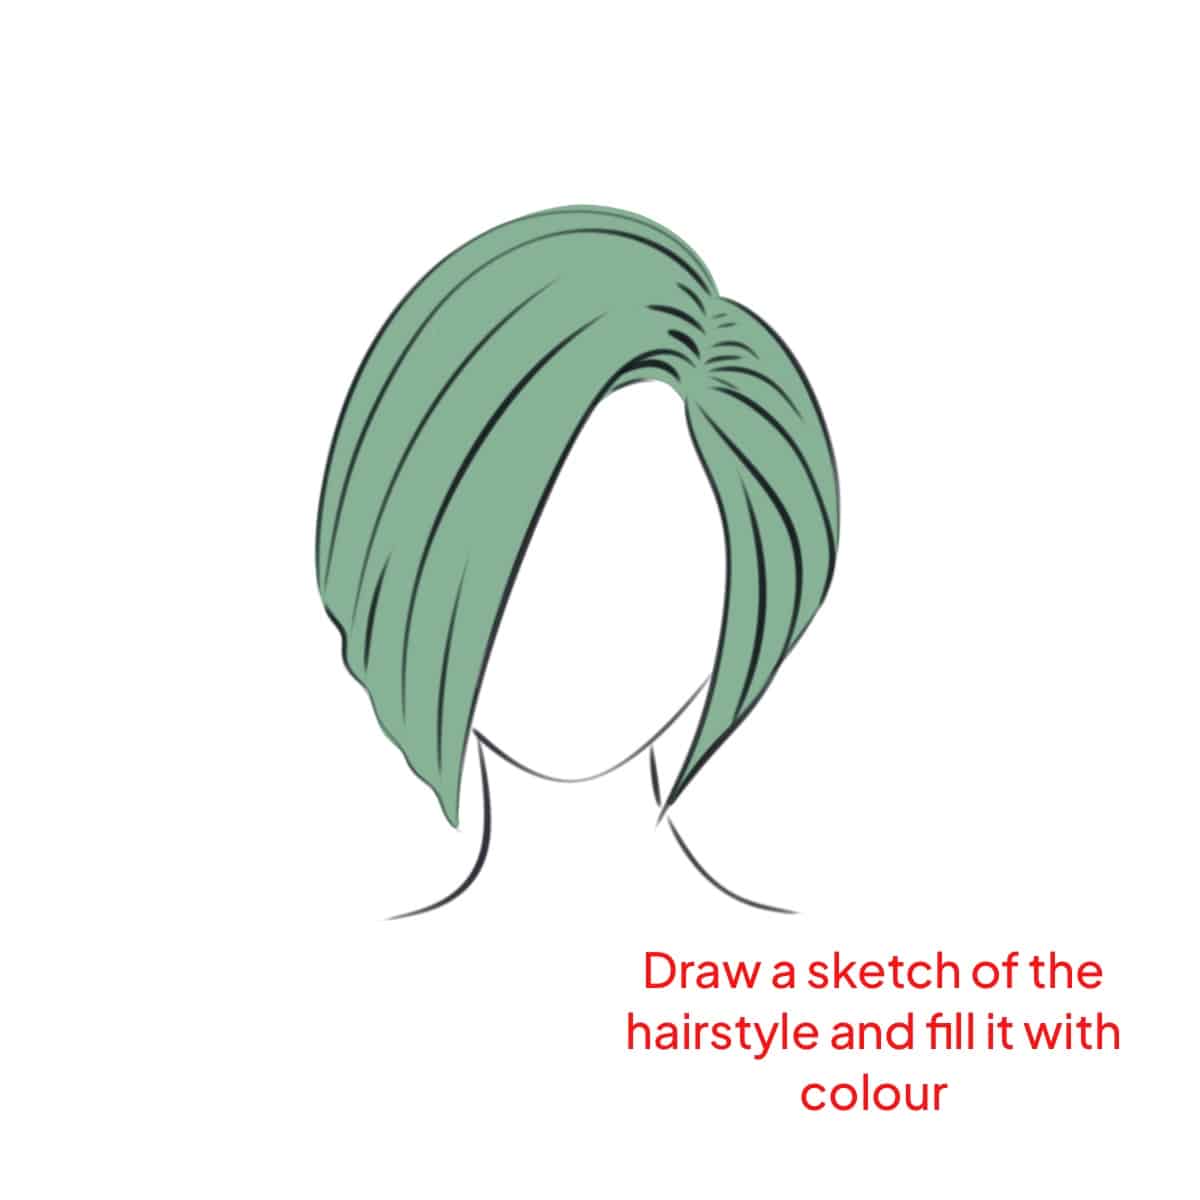 Drawn and colored sketch of the short woman hairstyle in the Procreate application